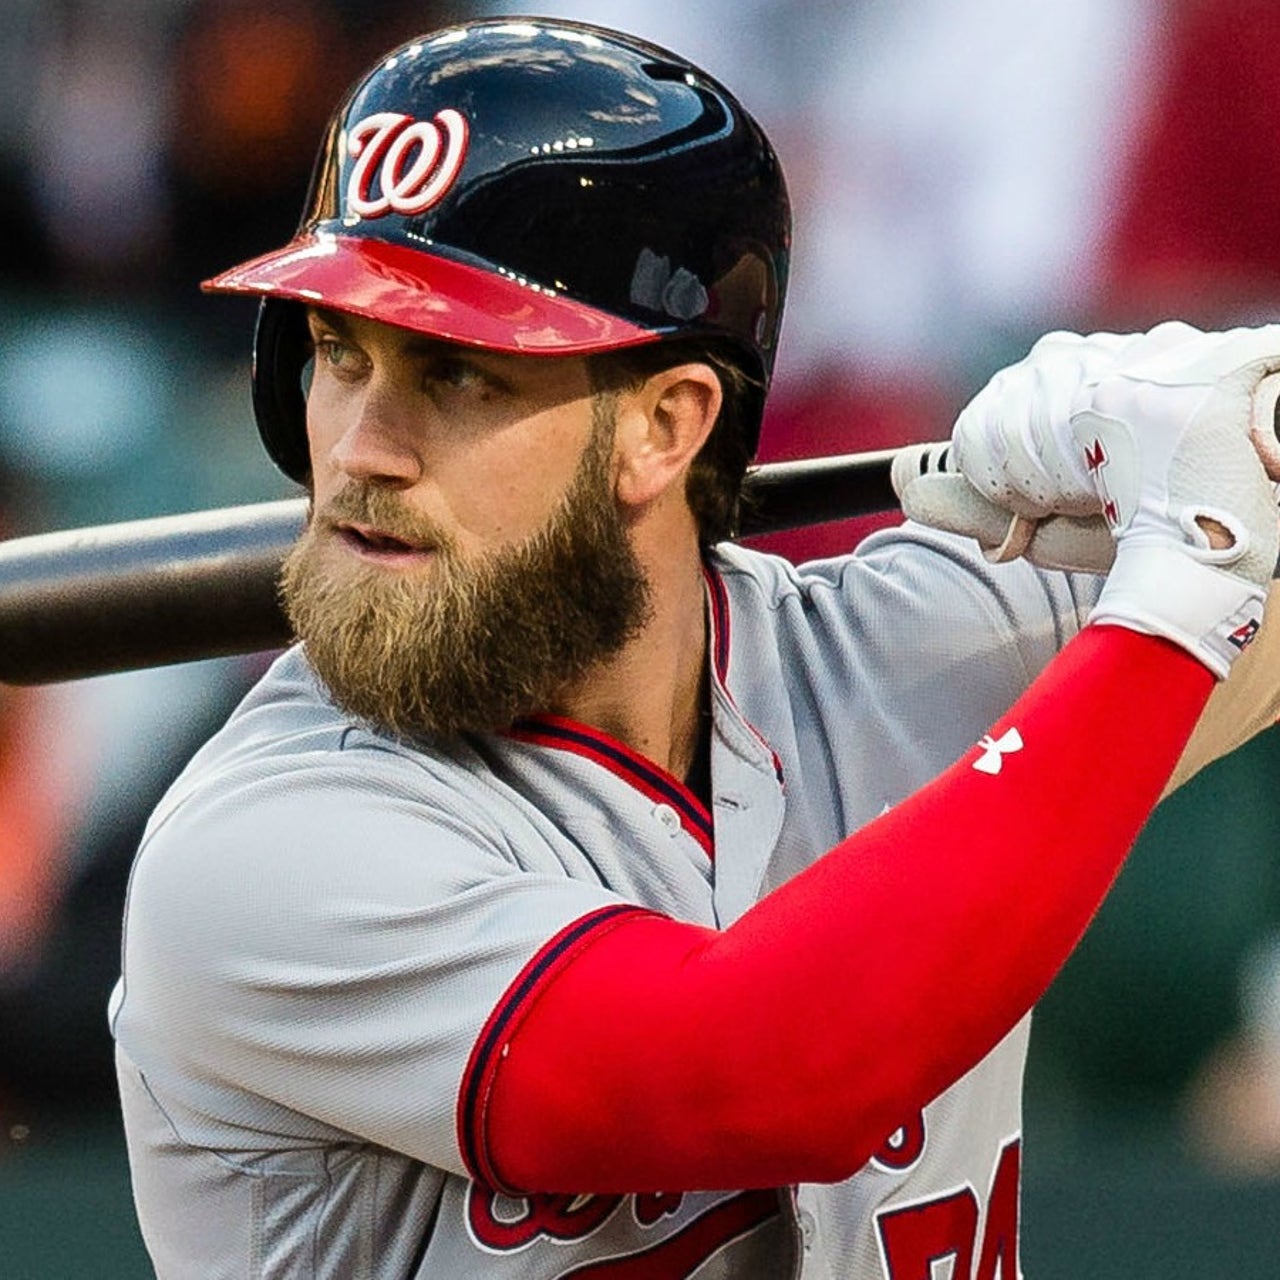 Nationals' Bryce Harper to debut new cleats on Memorial Day - Federal  Baseball